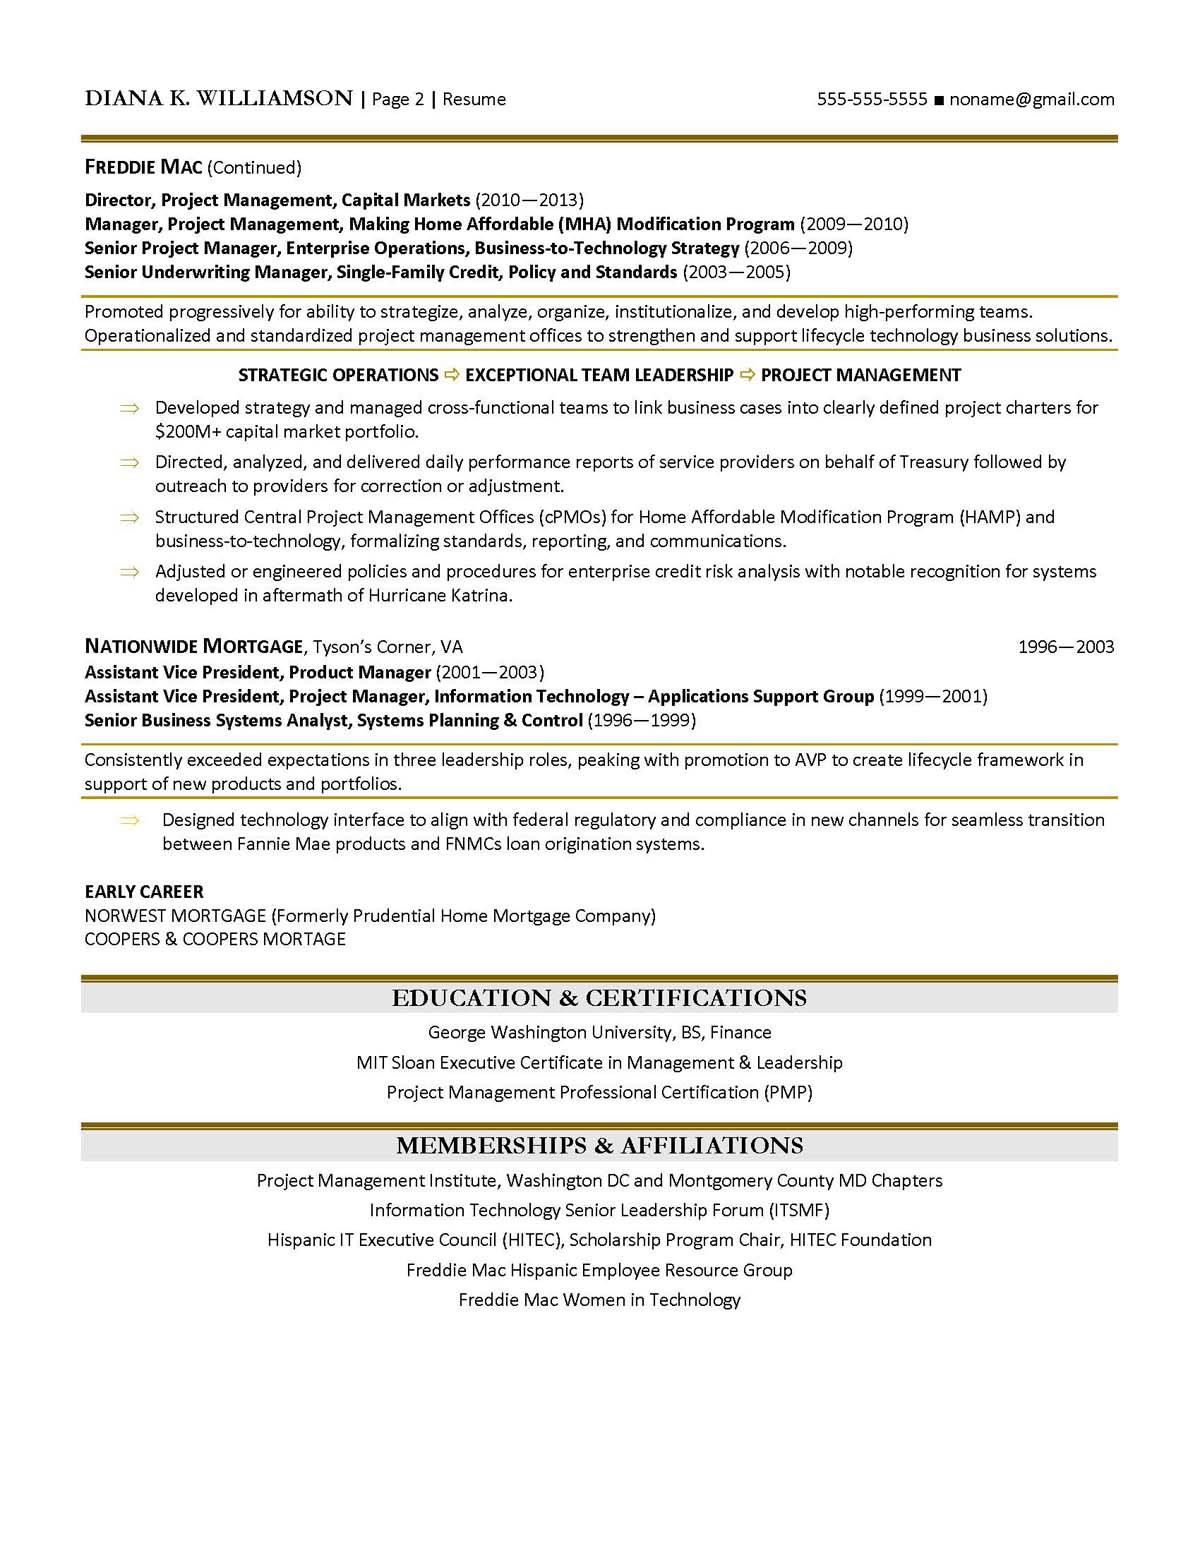 Sample resume: Operations and Logistics, High Experience, Chronological